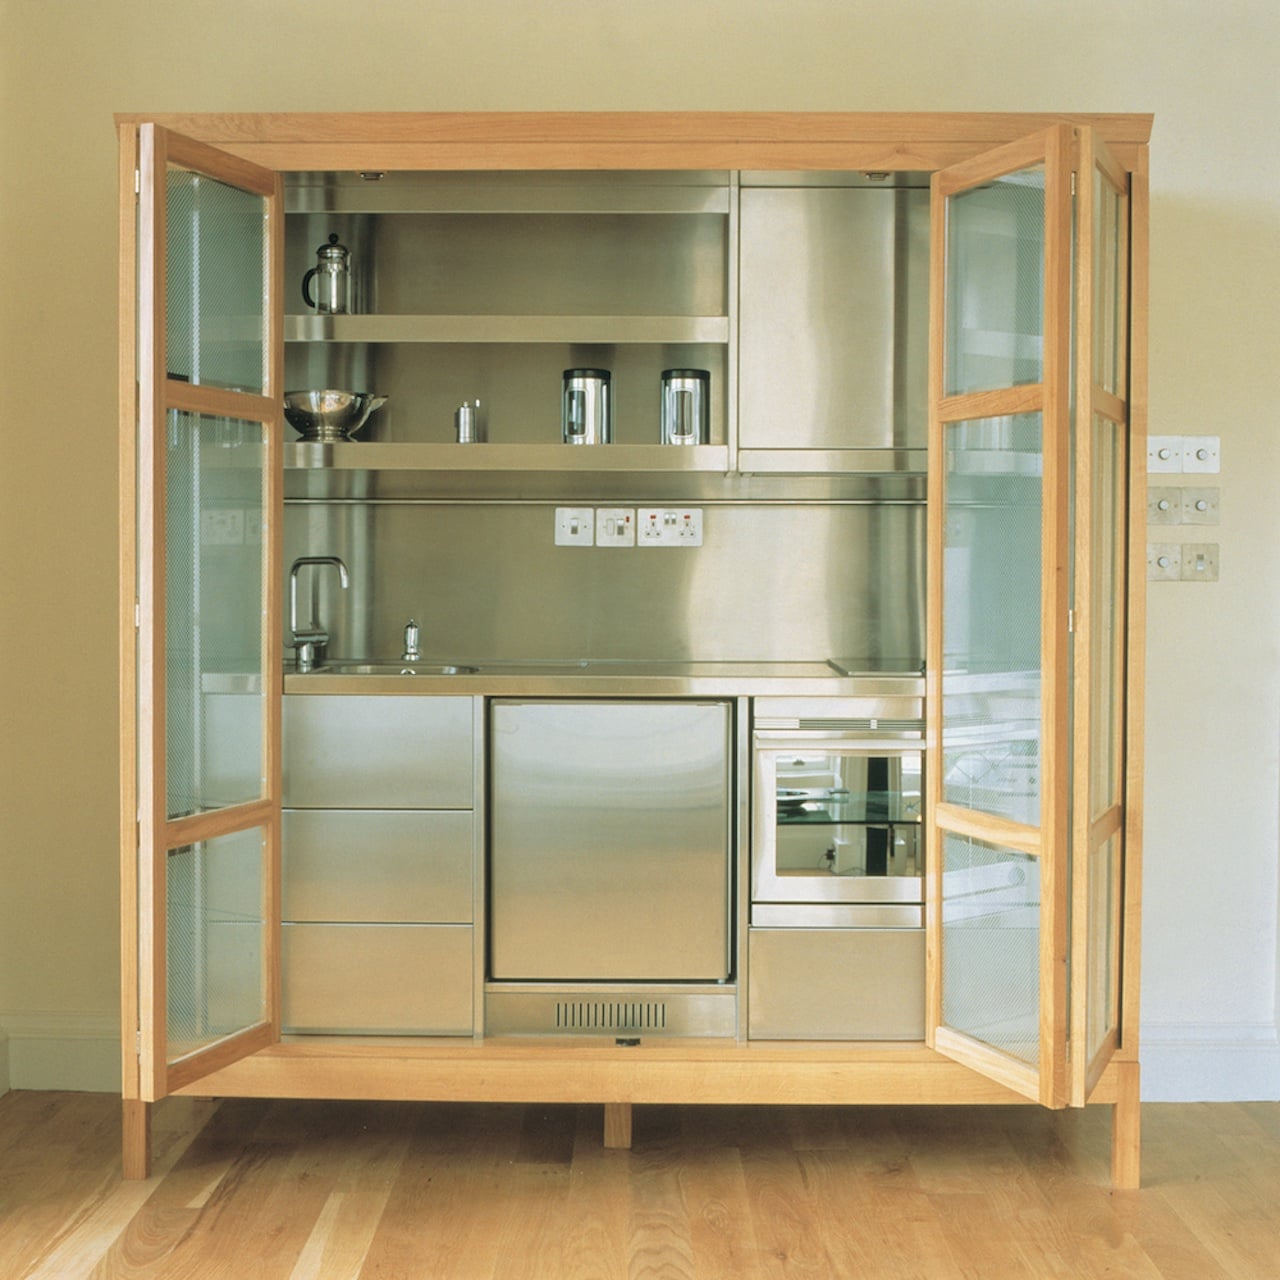 Kitchen in a Cabinet